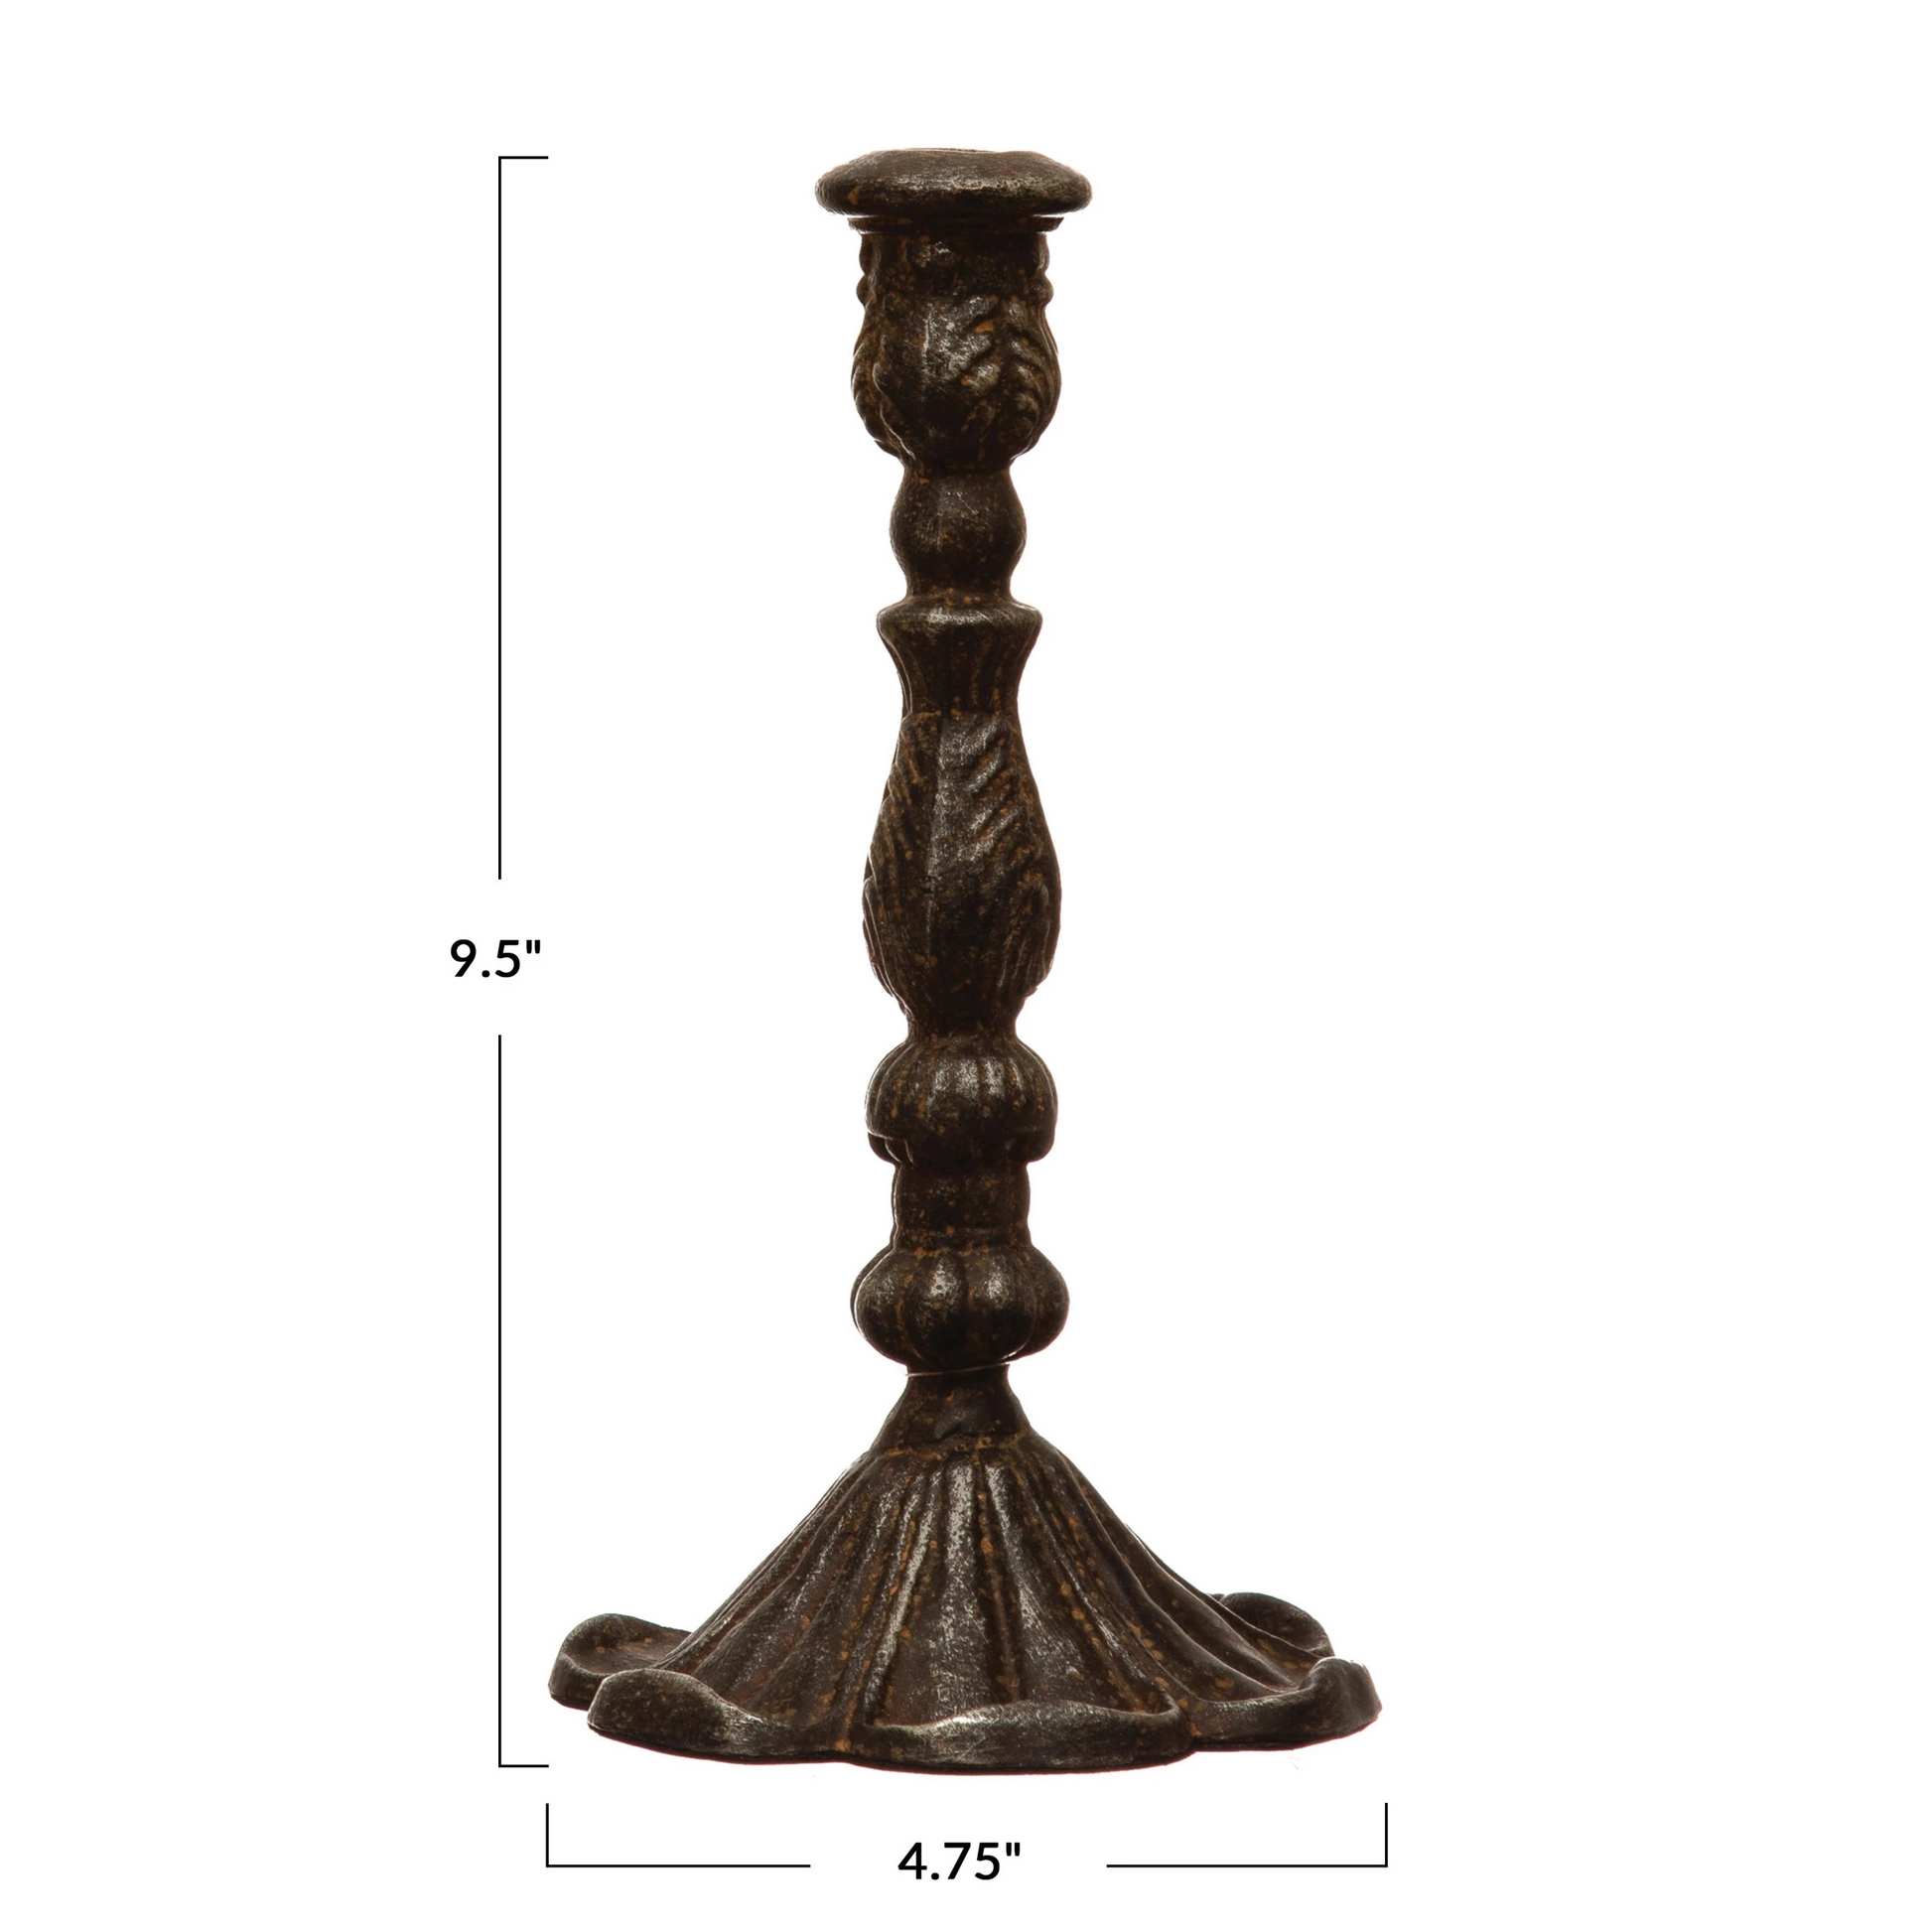 Distressed Cast Iron Candle Taper Holder - Black Finish - 9-1/2"H - Mellow Monkey